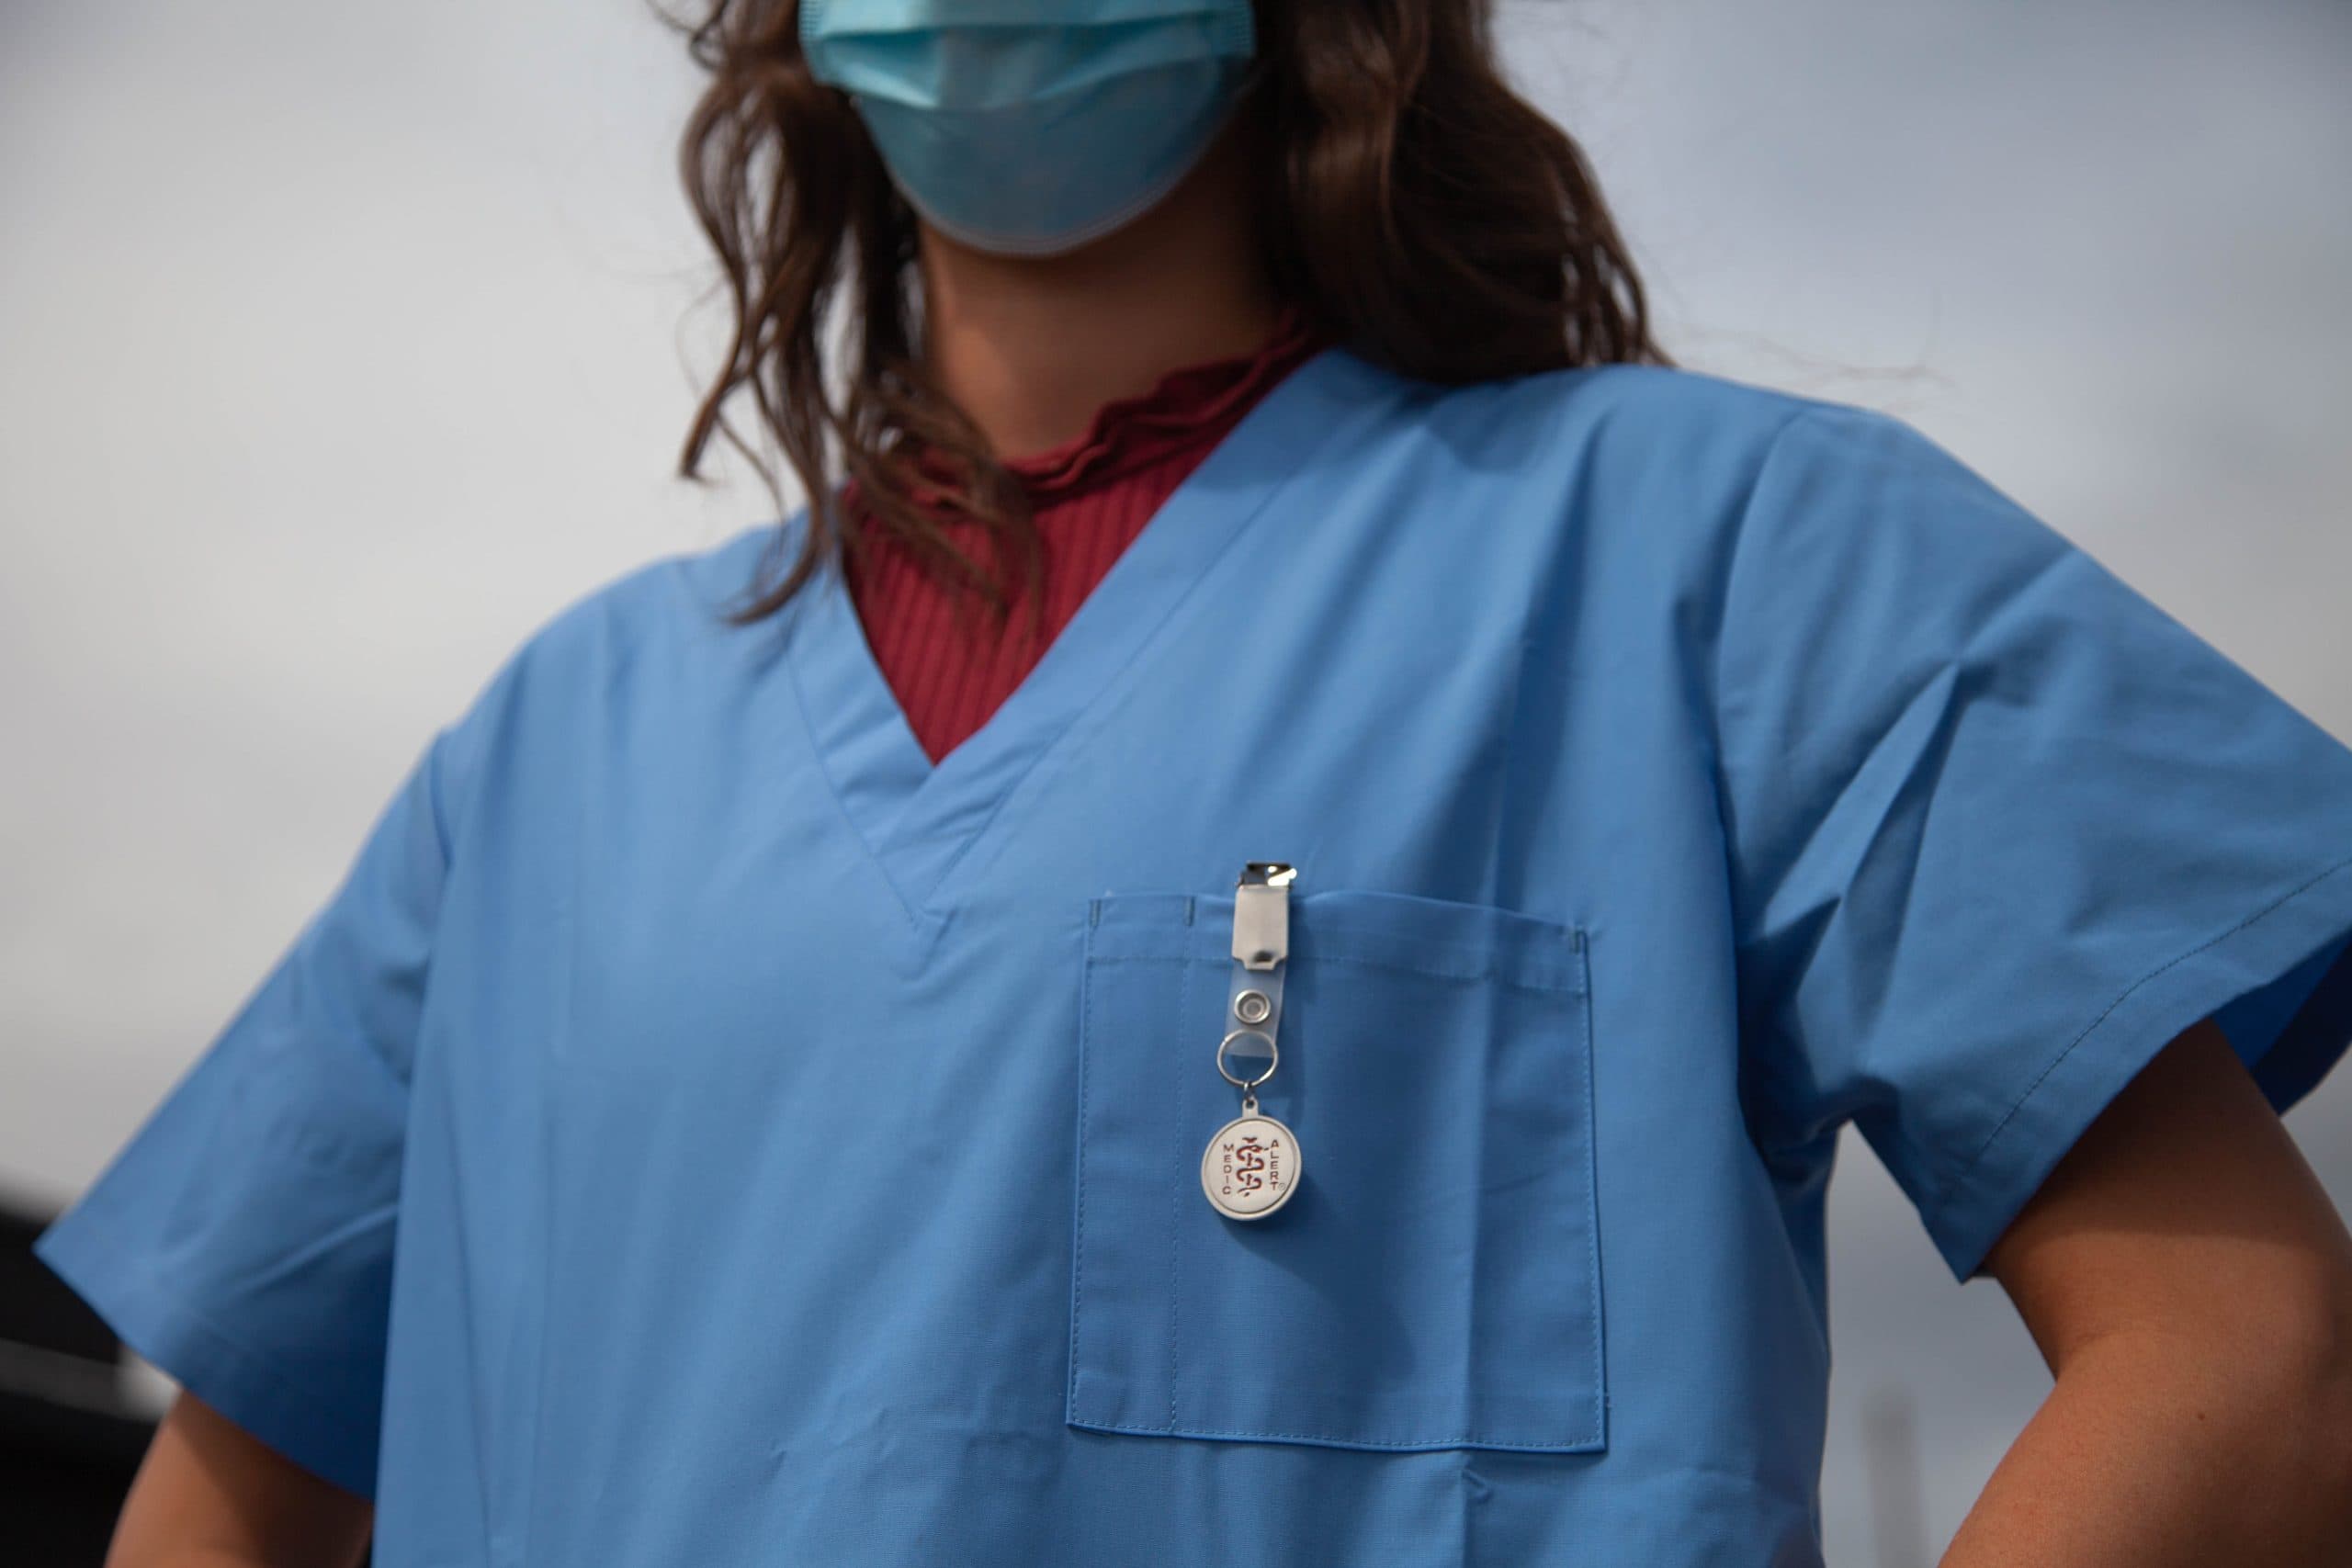 The Best Scrubs for Women Working in Medical Facilities